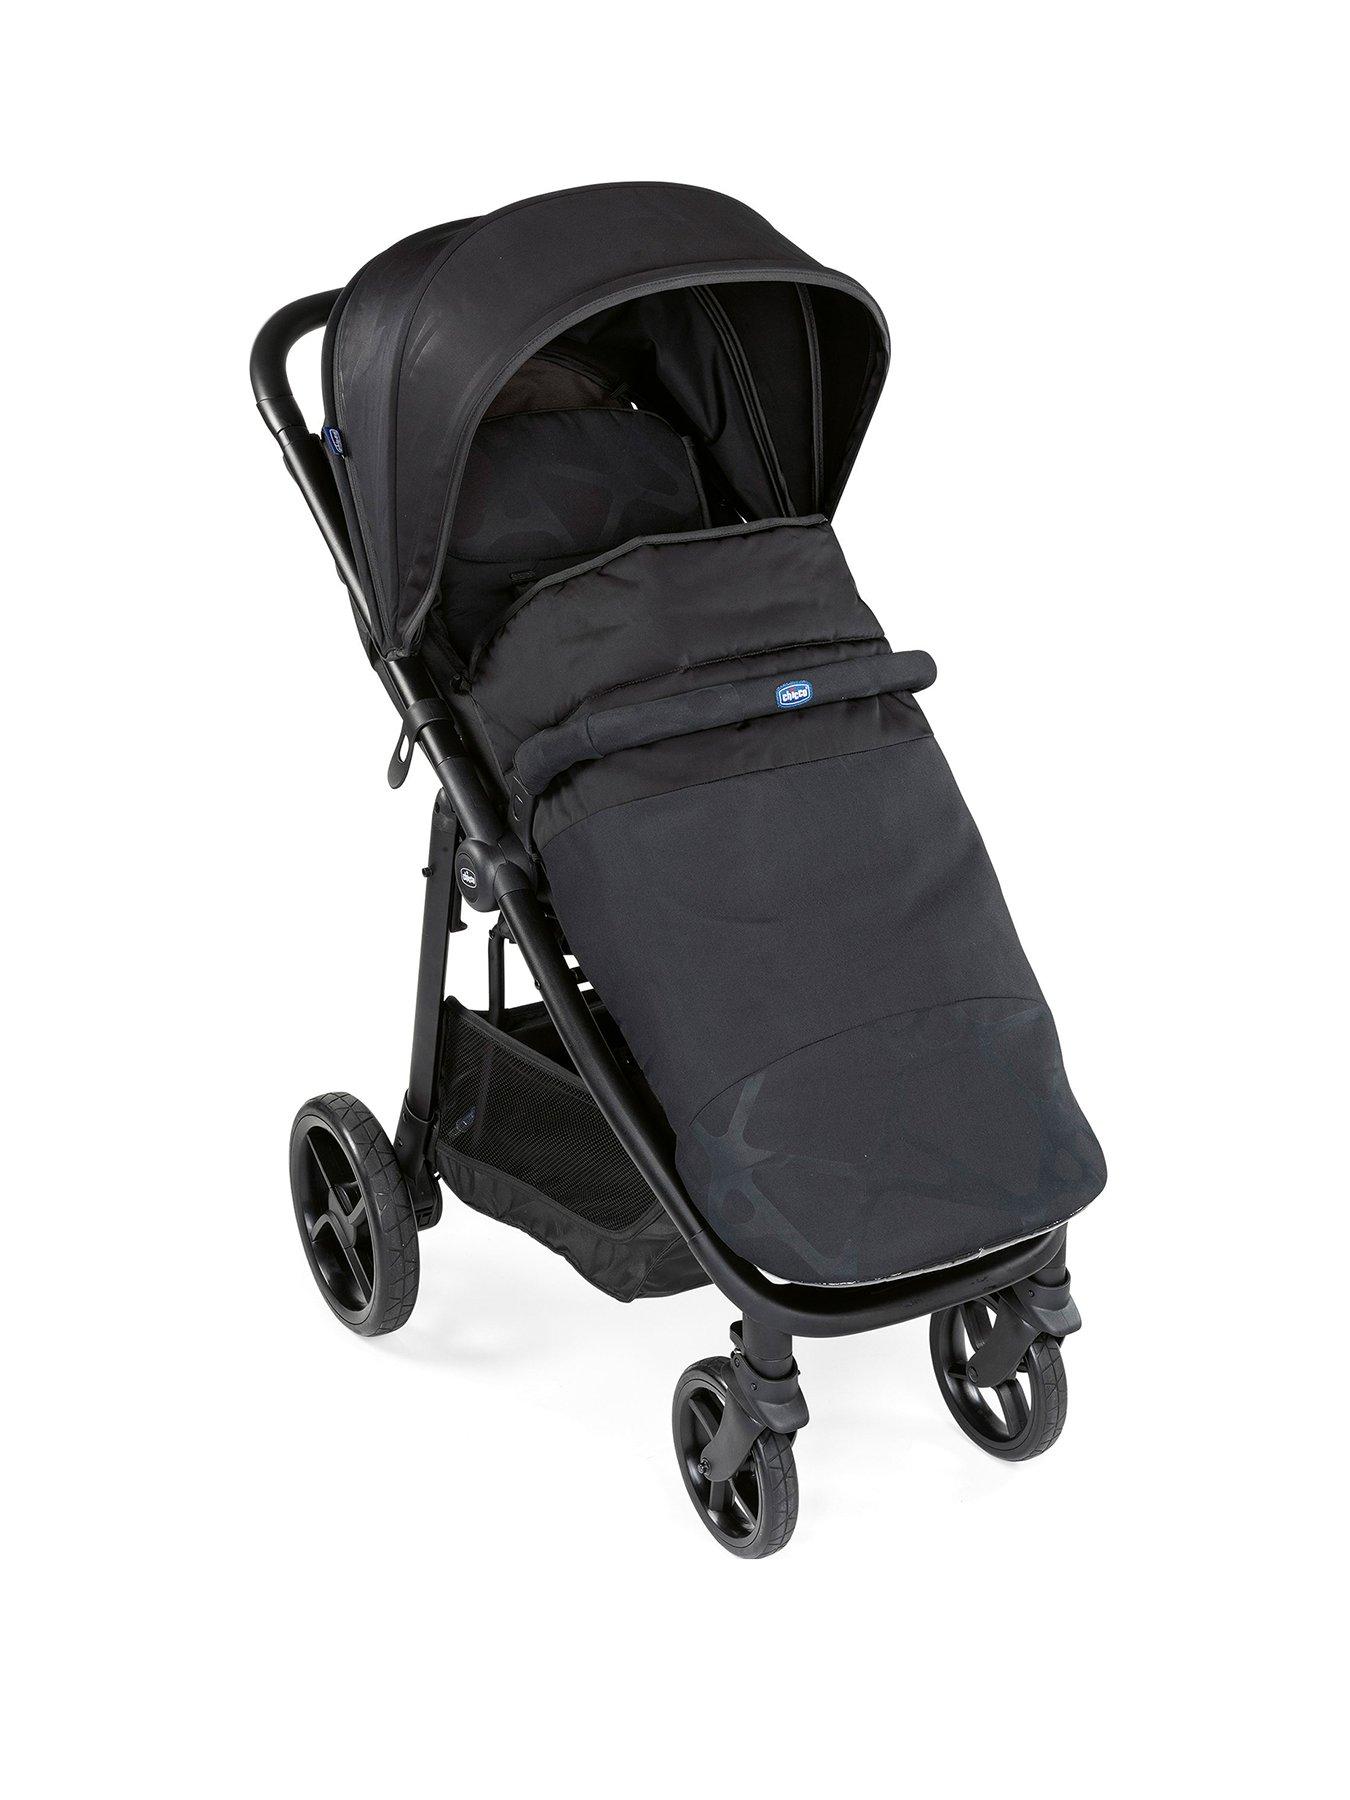 pushchair with adjustable handle height